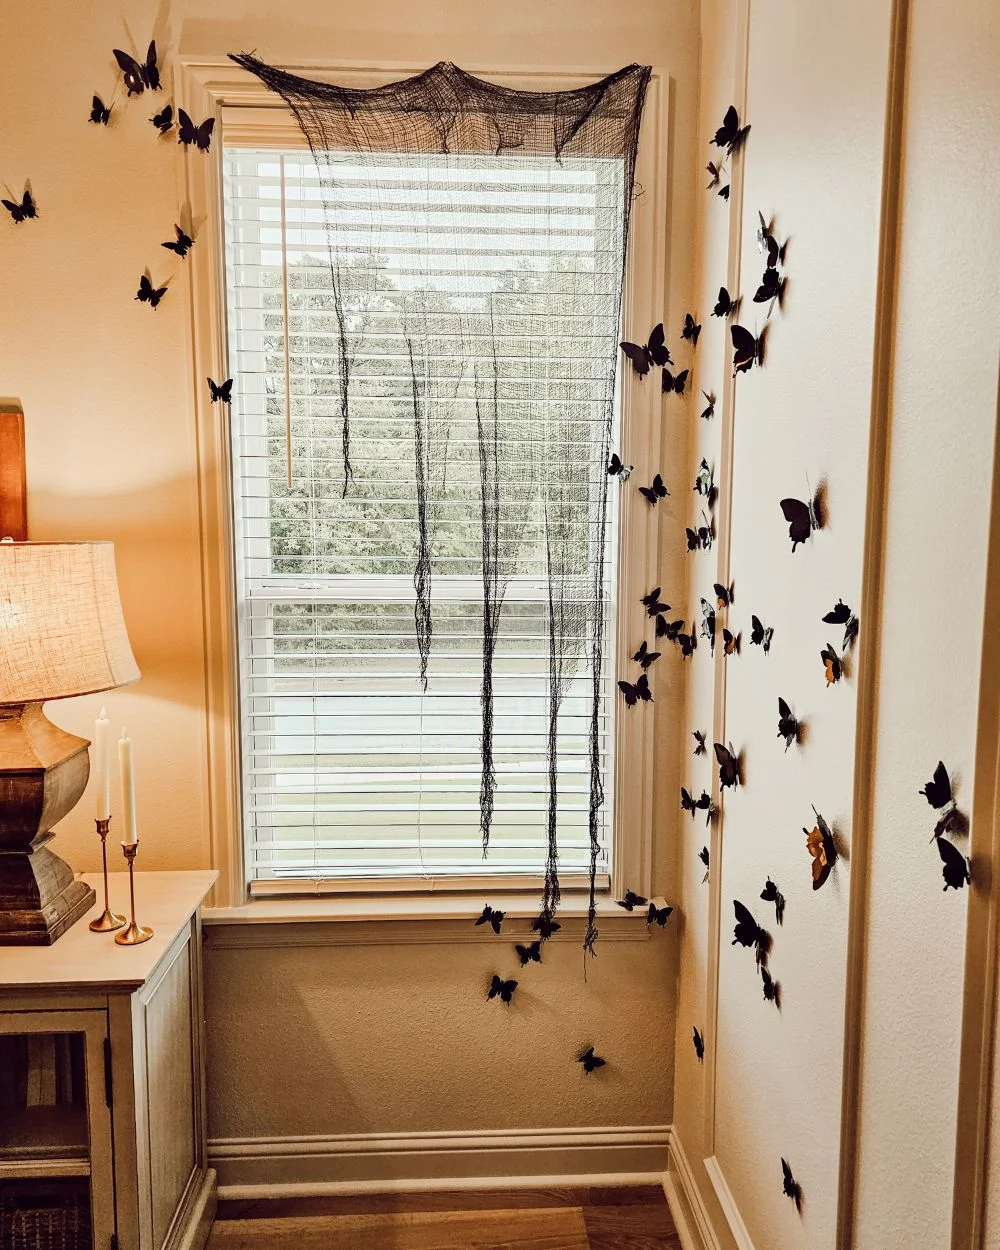 black butterflies around window and down the wall. Creepy black cloth as a makeshift curtain